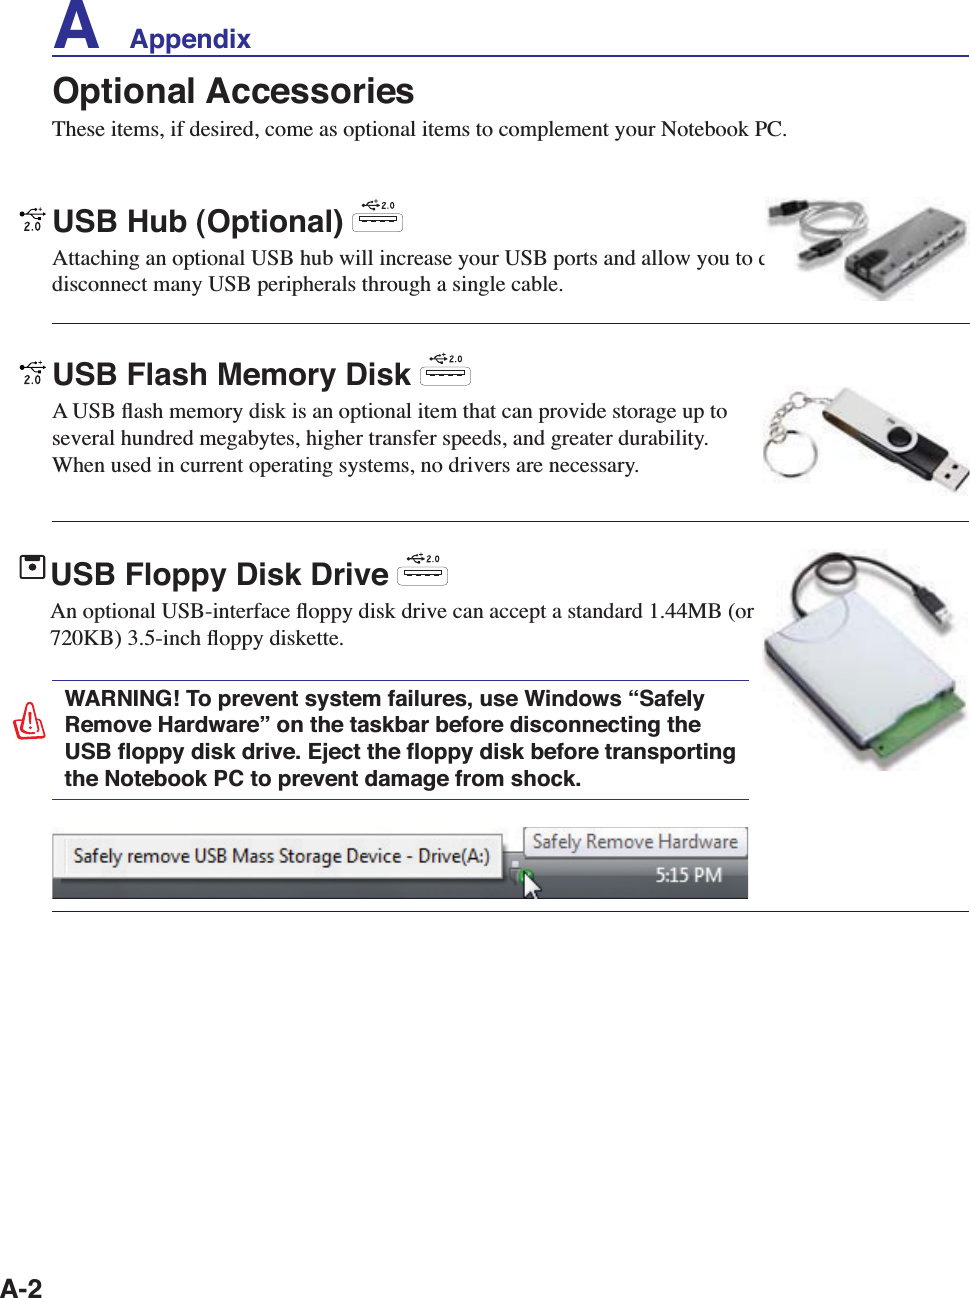 A-2A    AppendixOptional AccessoriesThese items, if desired, come as optional items to complement your Notebook PC.USB Flash Memory Disk A USB ﬂash memory disk is an optional item that can provide storage up to several hundred megabytes, higher transfer speeds, and greater durability. When used in current operating systems, no drivers are necessary. USB Hub (Optional) Attaching an optional USB hub will increase your USB ports and allow you to quickly connect or disconnect many USB peripherals through a single cable.USB Floppy Disk Drive An optional USB-interface ﬂoppy disk drive can accept a standard 1.44MB (or 720KB) 3.5-inch ﬂoppy diskette. WARNING! To prevent system failures, use Windows “Safely Remove Hardware” on the taskbar before disconnecting the USB ﬂoppy disk drive. Eject the ﬂoppy disk before transporting the Notebook PC to prevent damage from shock.